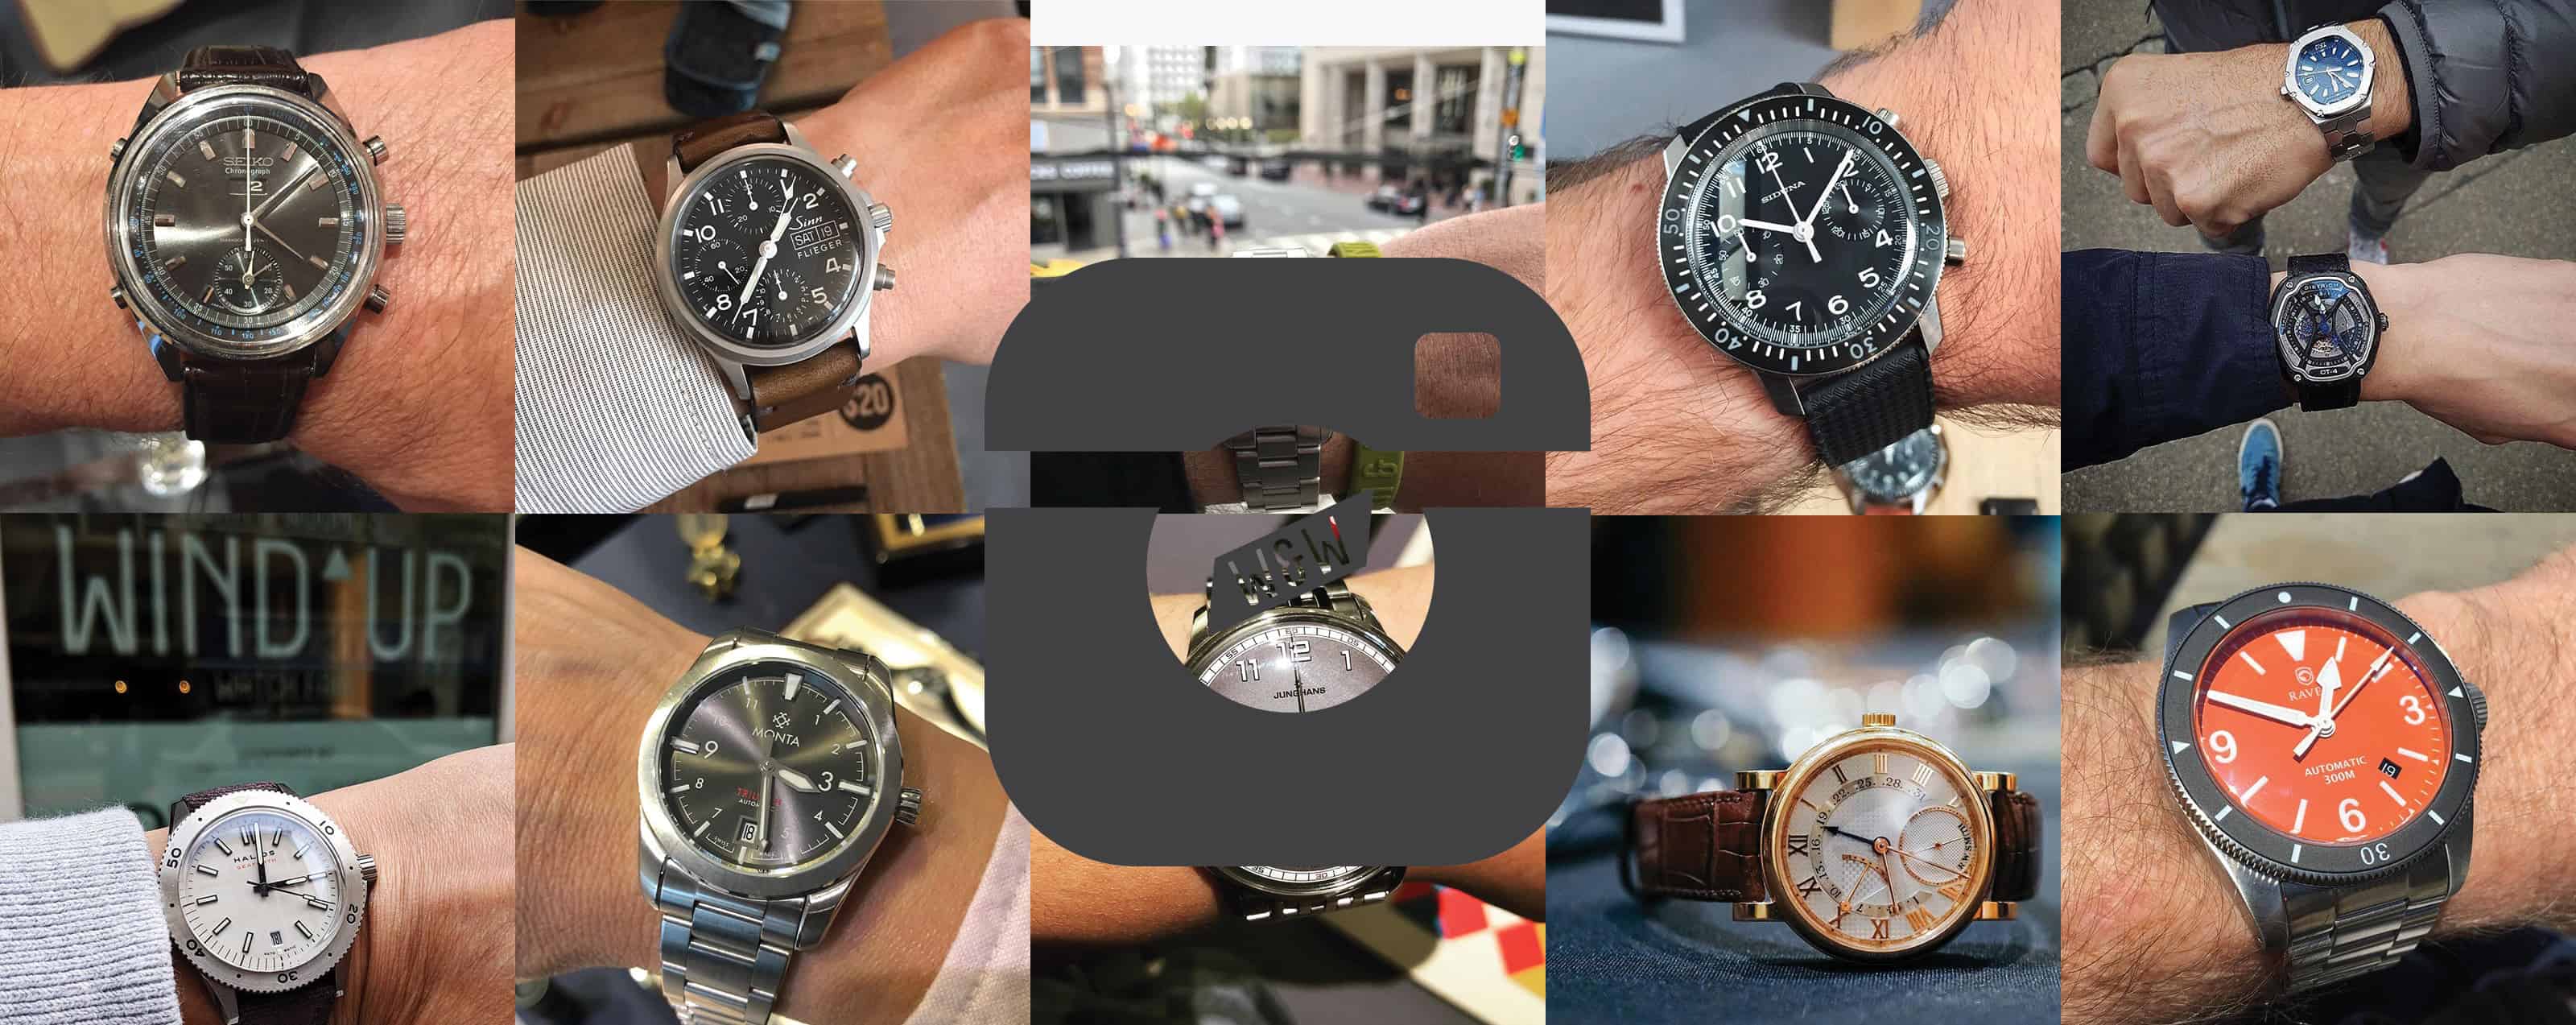 WindUpSF Round-Up With a Seiko 5718 Olympic Counter Chronograph, a NOS  Guinand Flying Officers Chronograph, and More - Worn & Wound